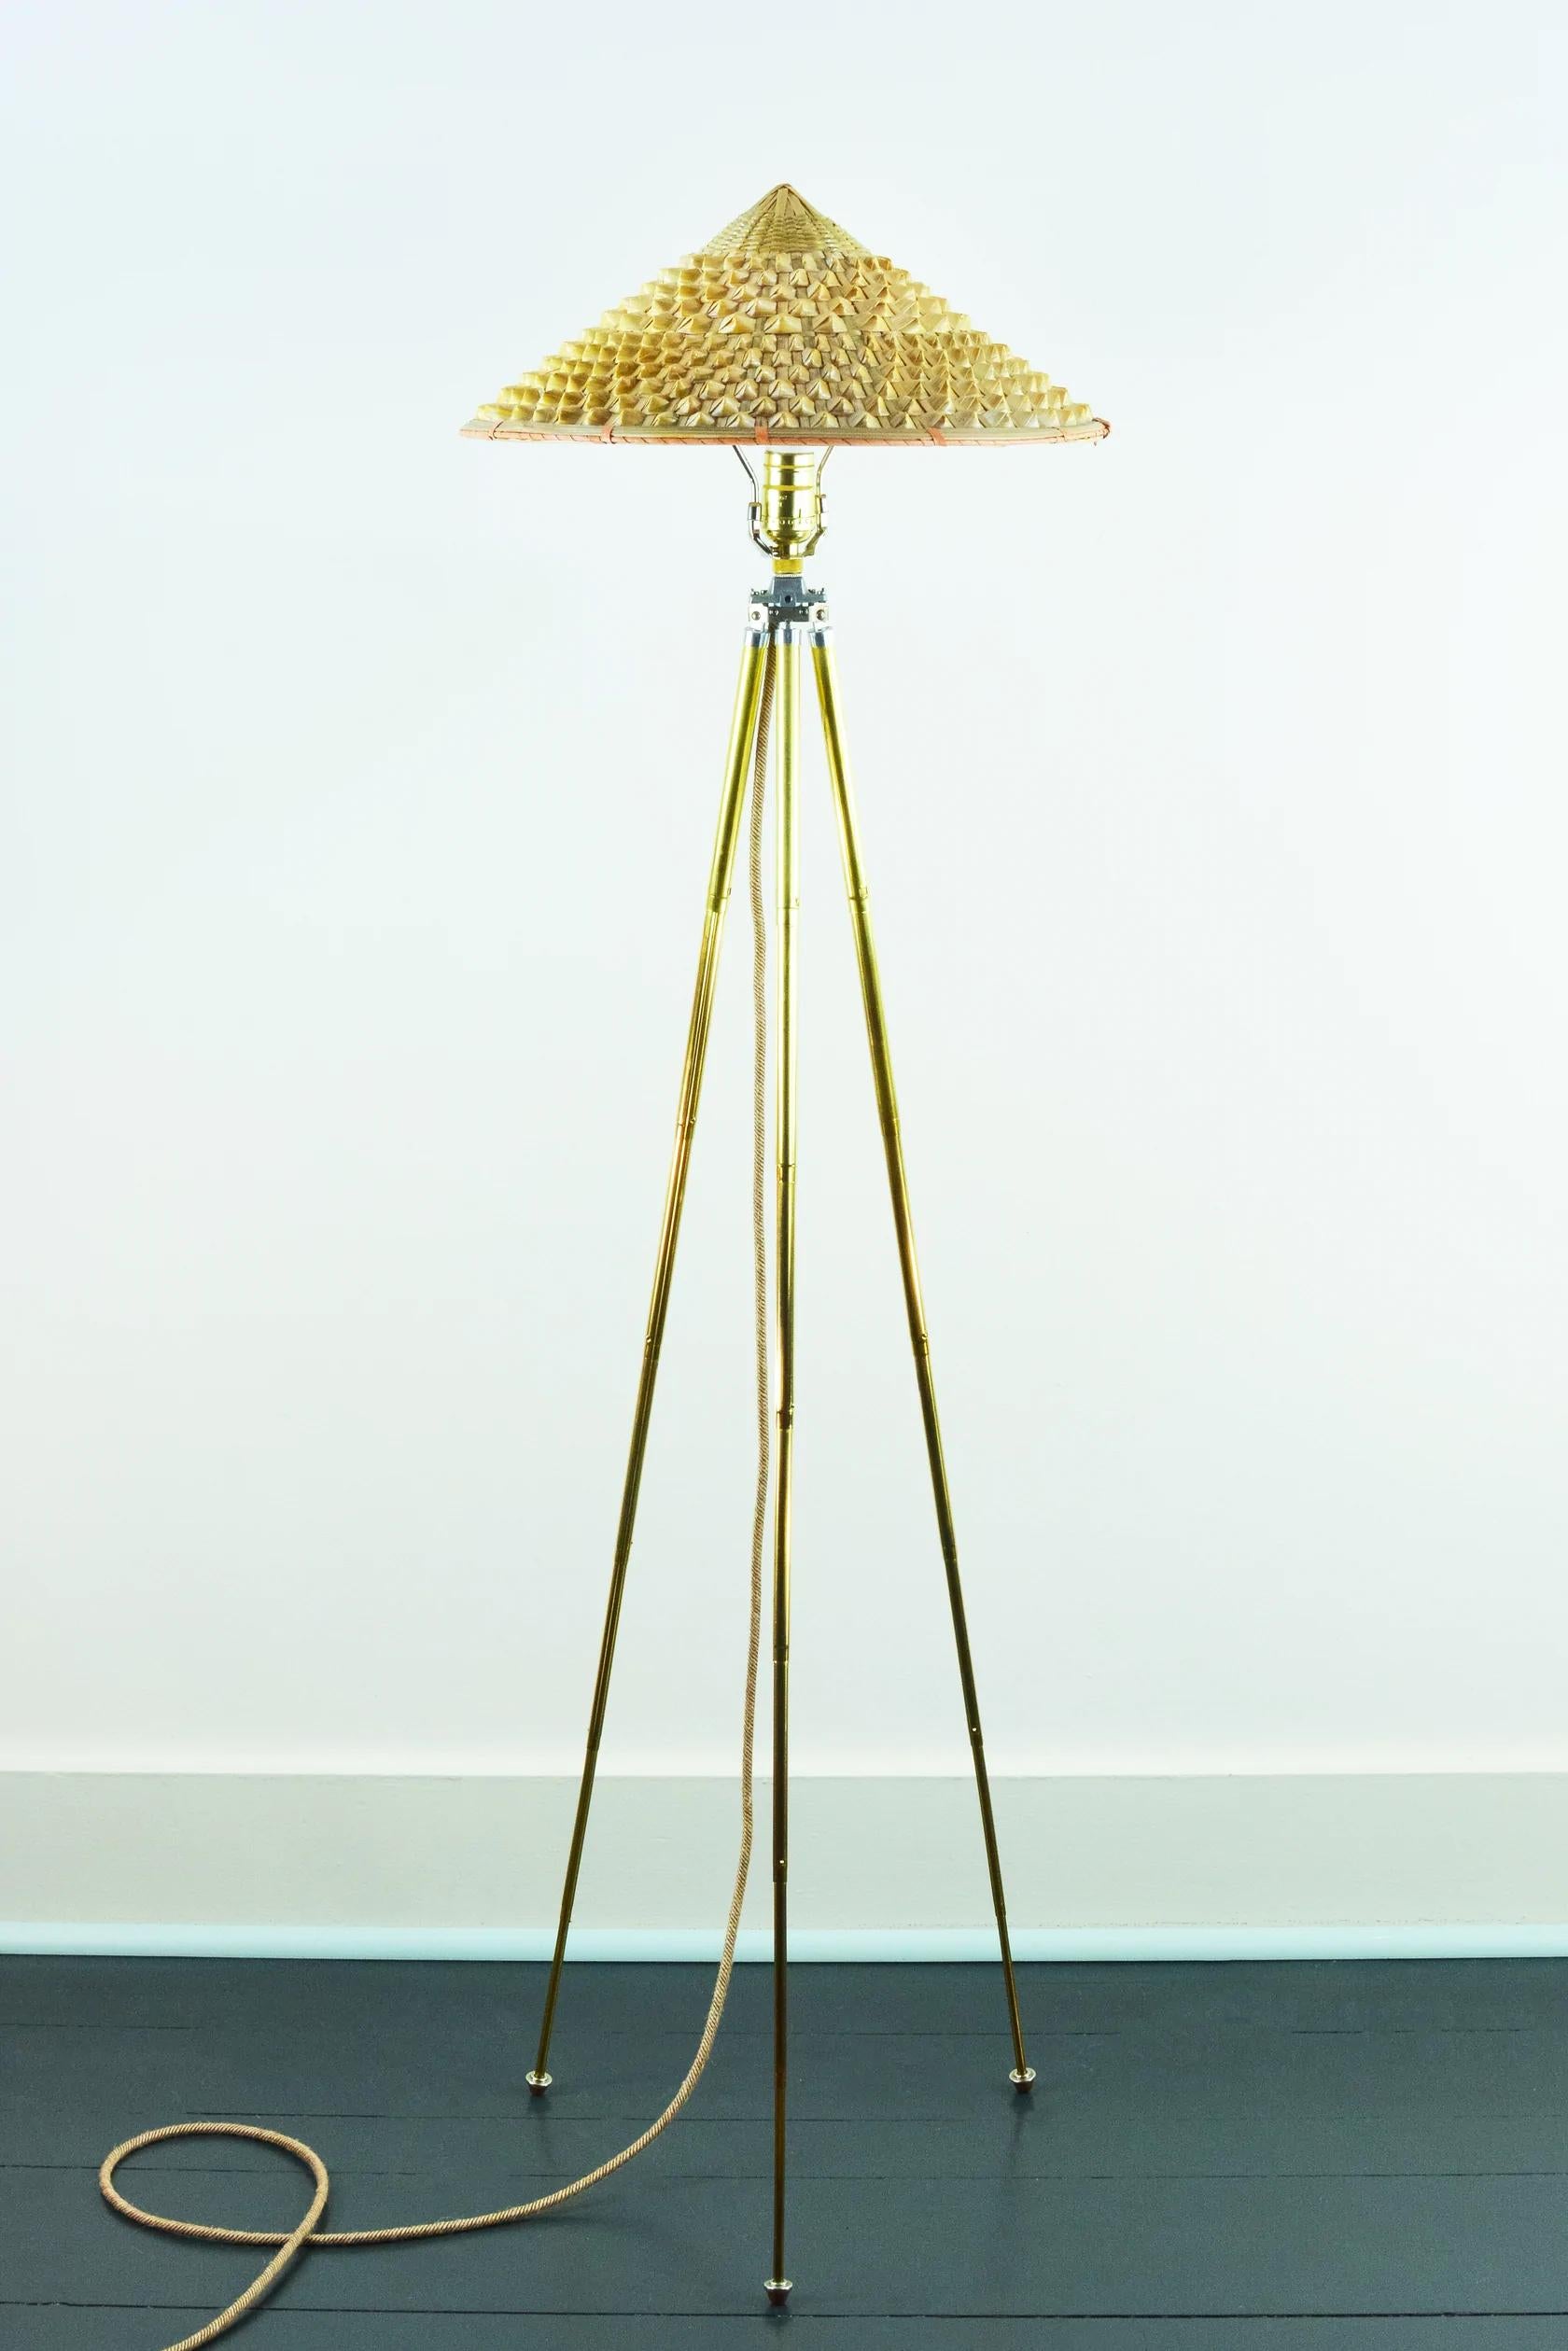 The 'Horst' adjustable brass tripod floor lamp collection was inspired by the life and times of globe-trotting early 20th century lensman Horst P. Horst, who introduced color photography to a mass audience through his genre-defining fashion shoots